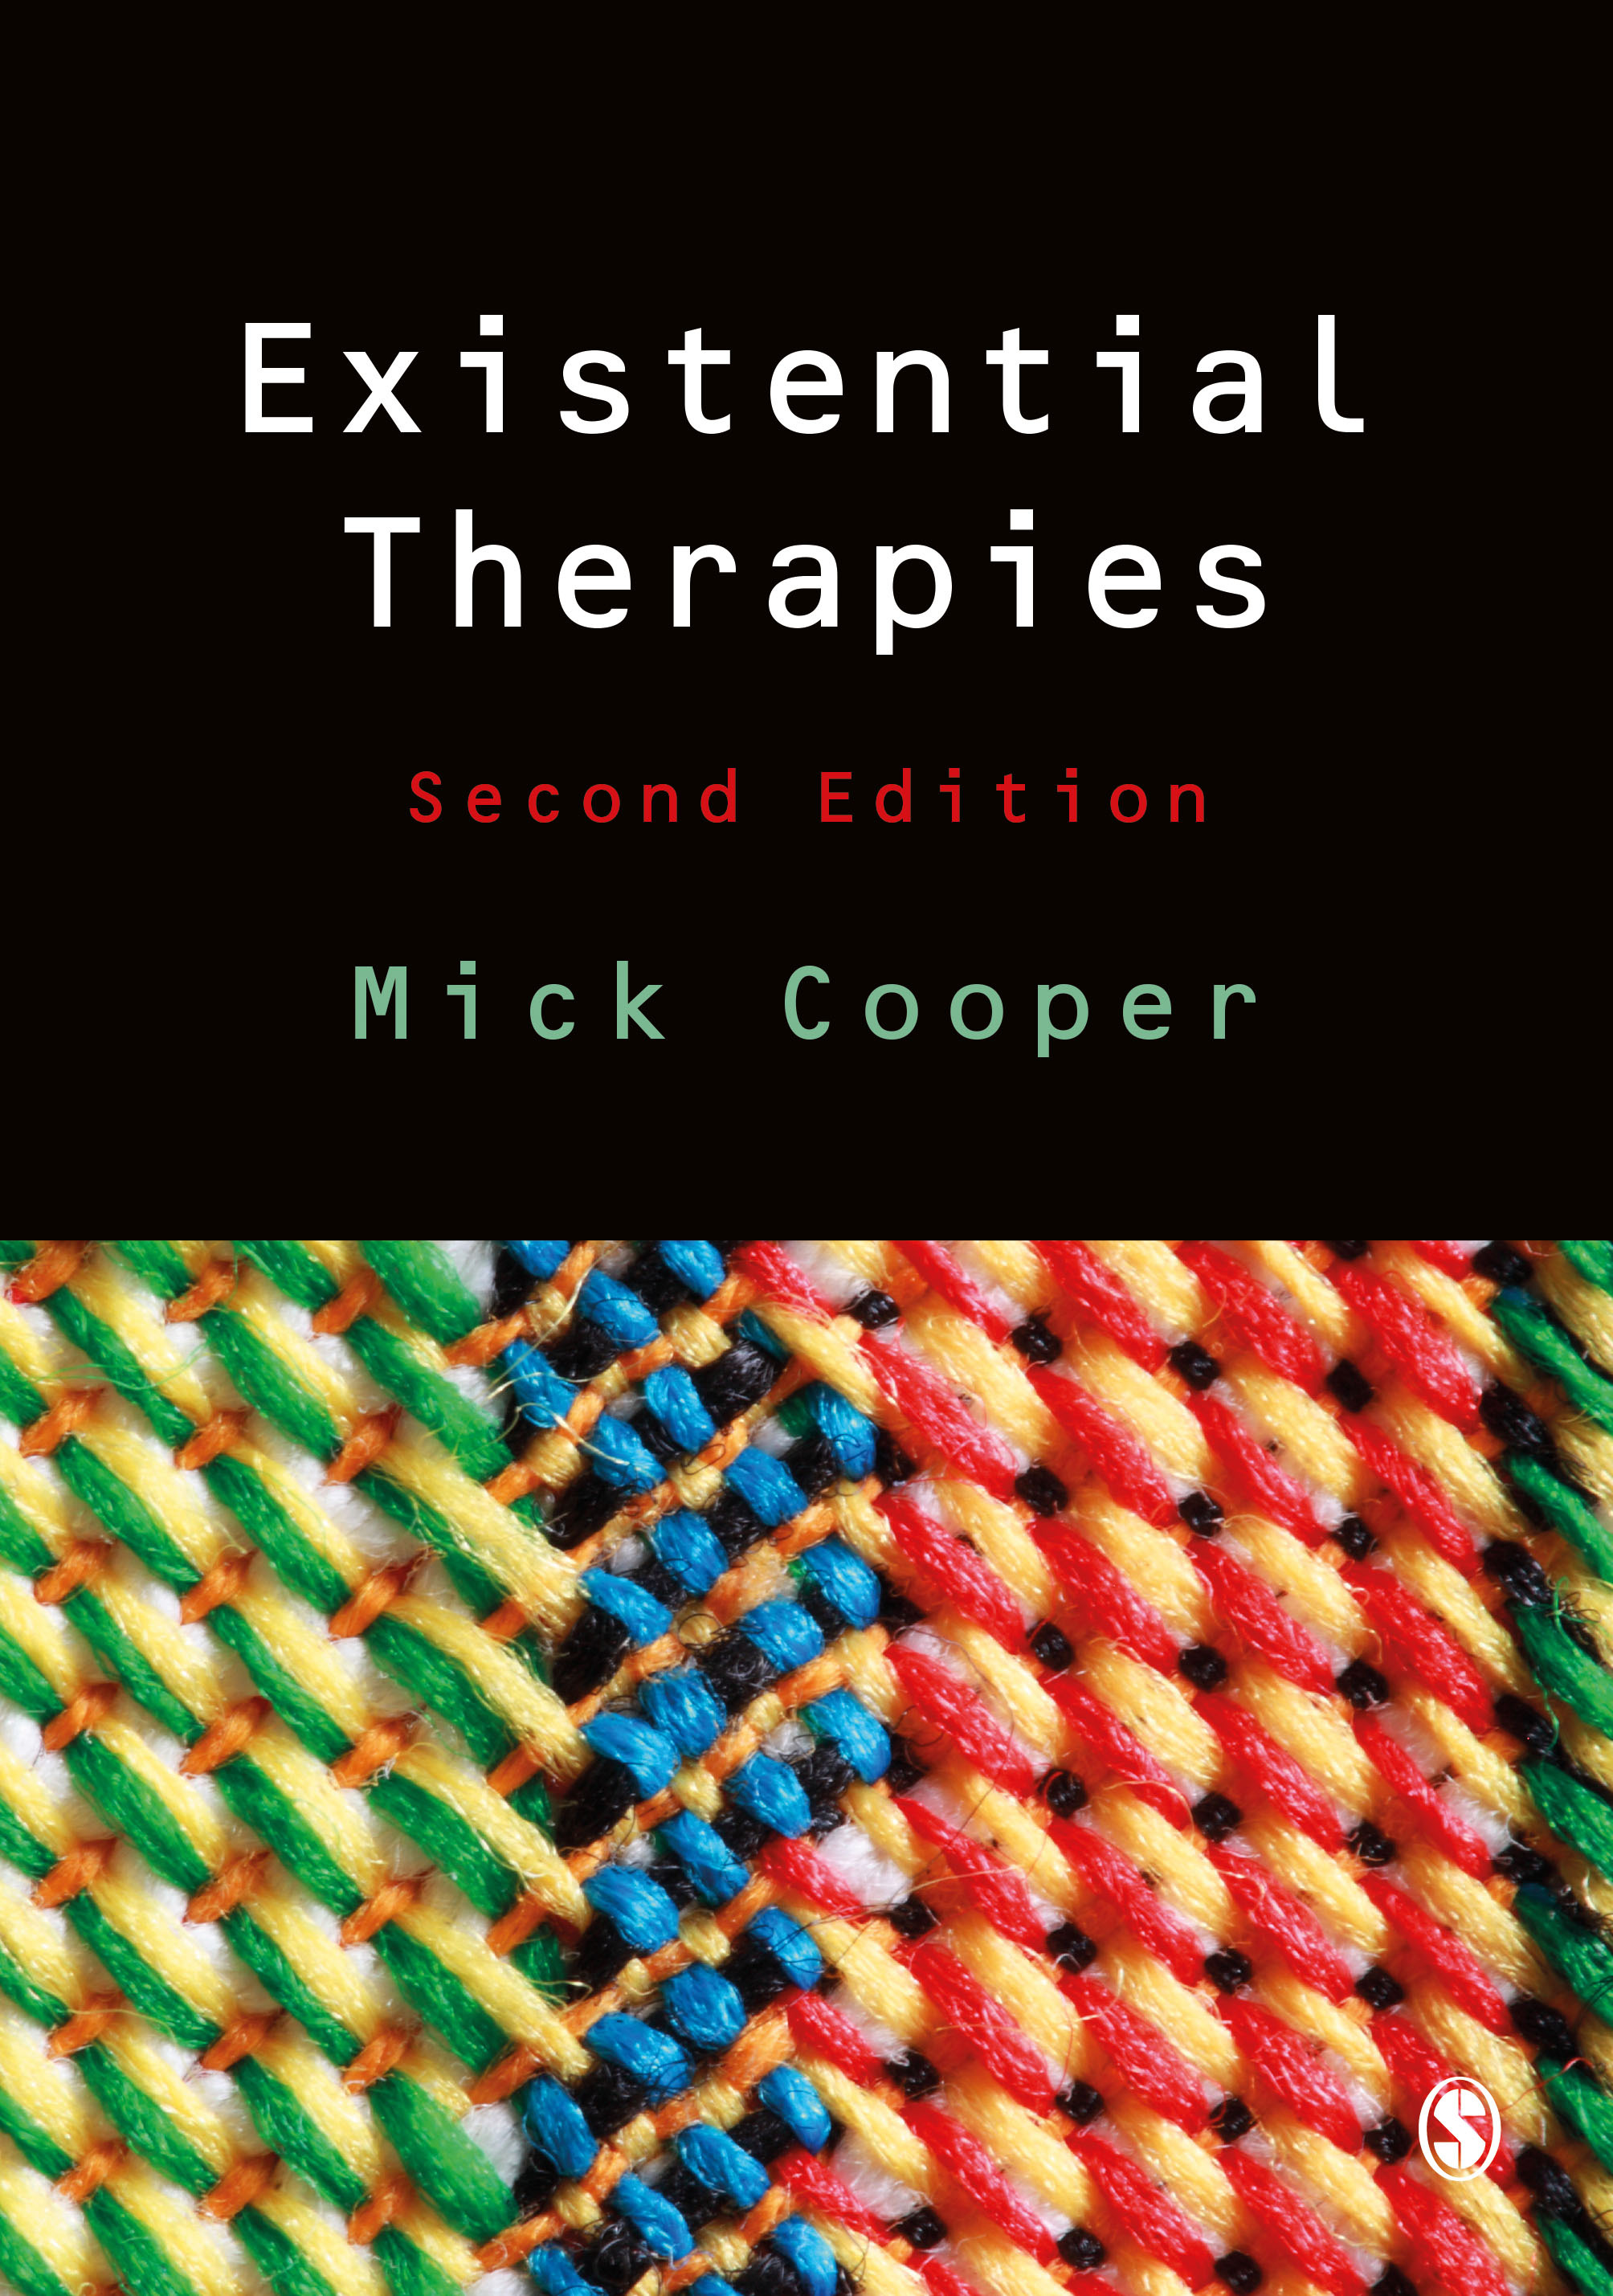 Existential Therapies book cover image